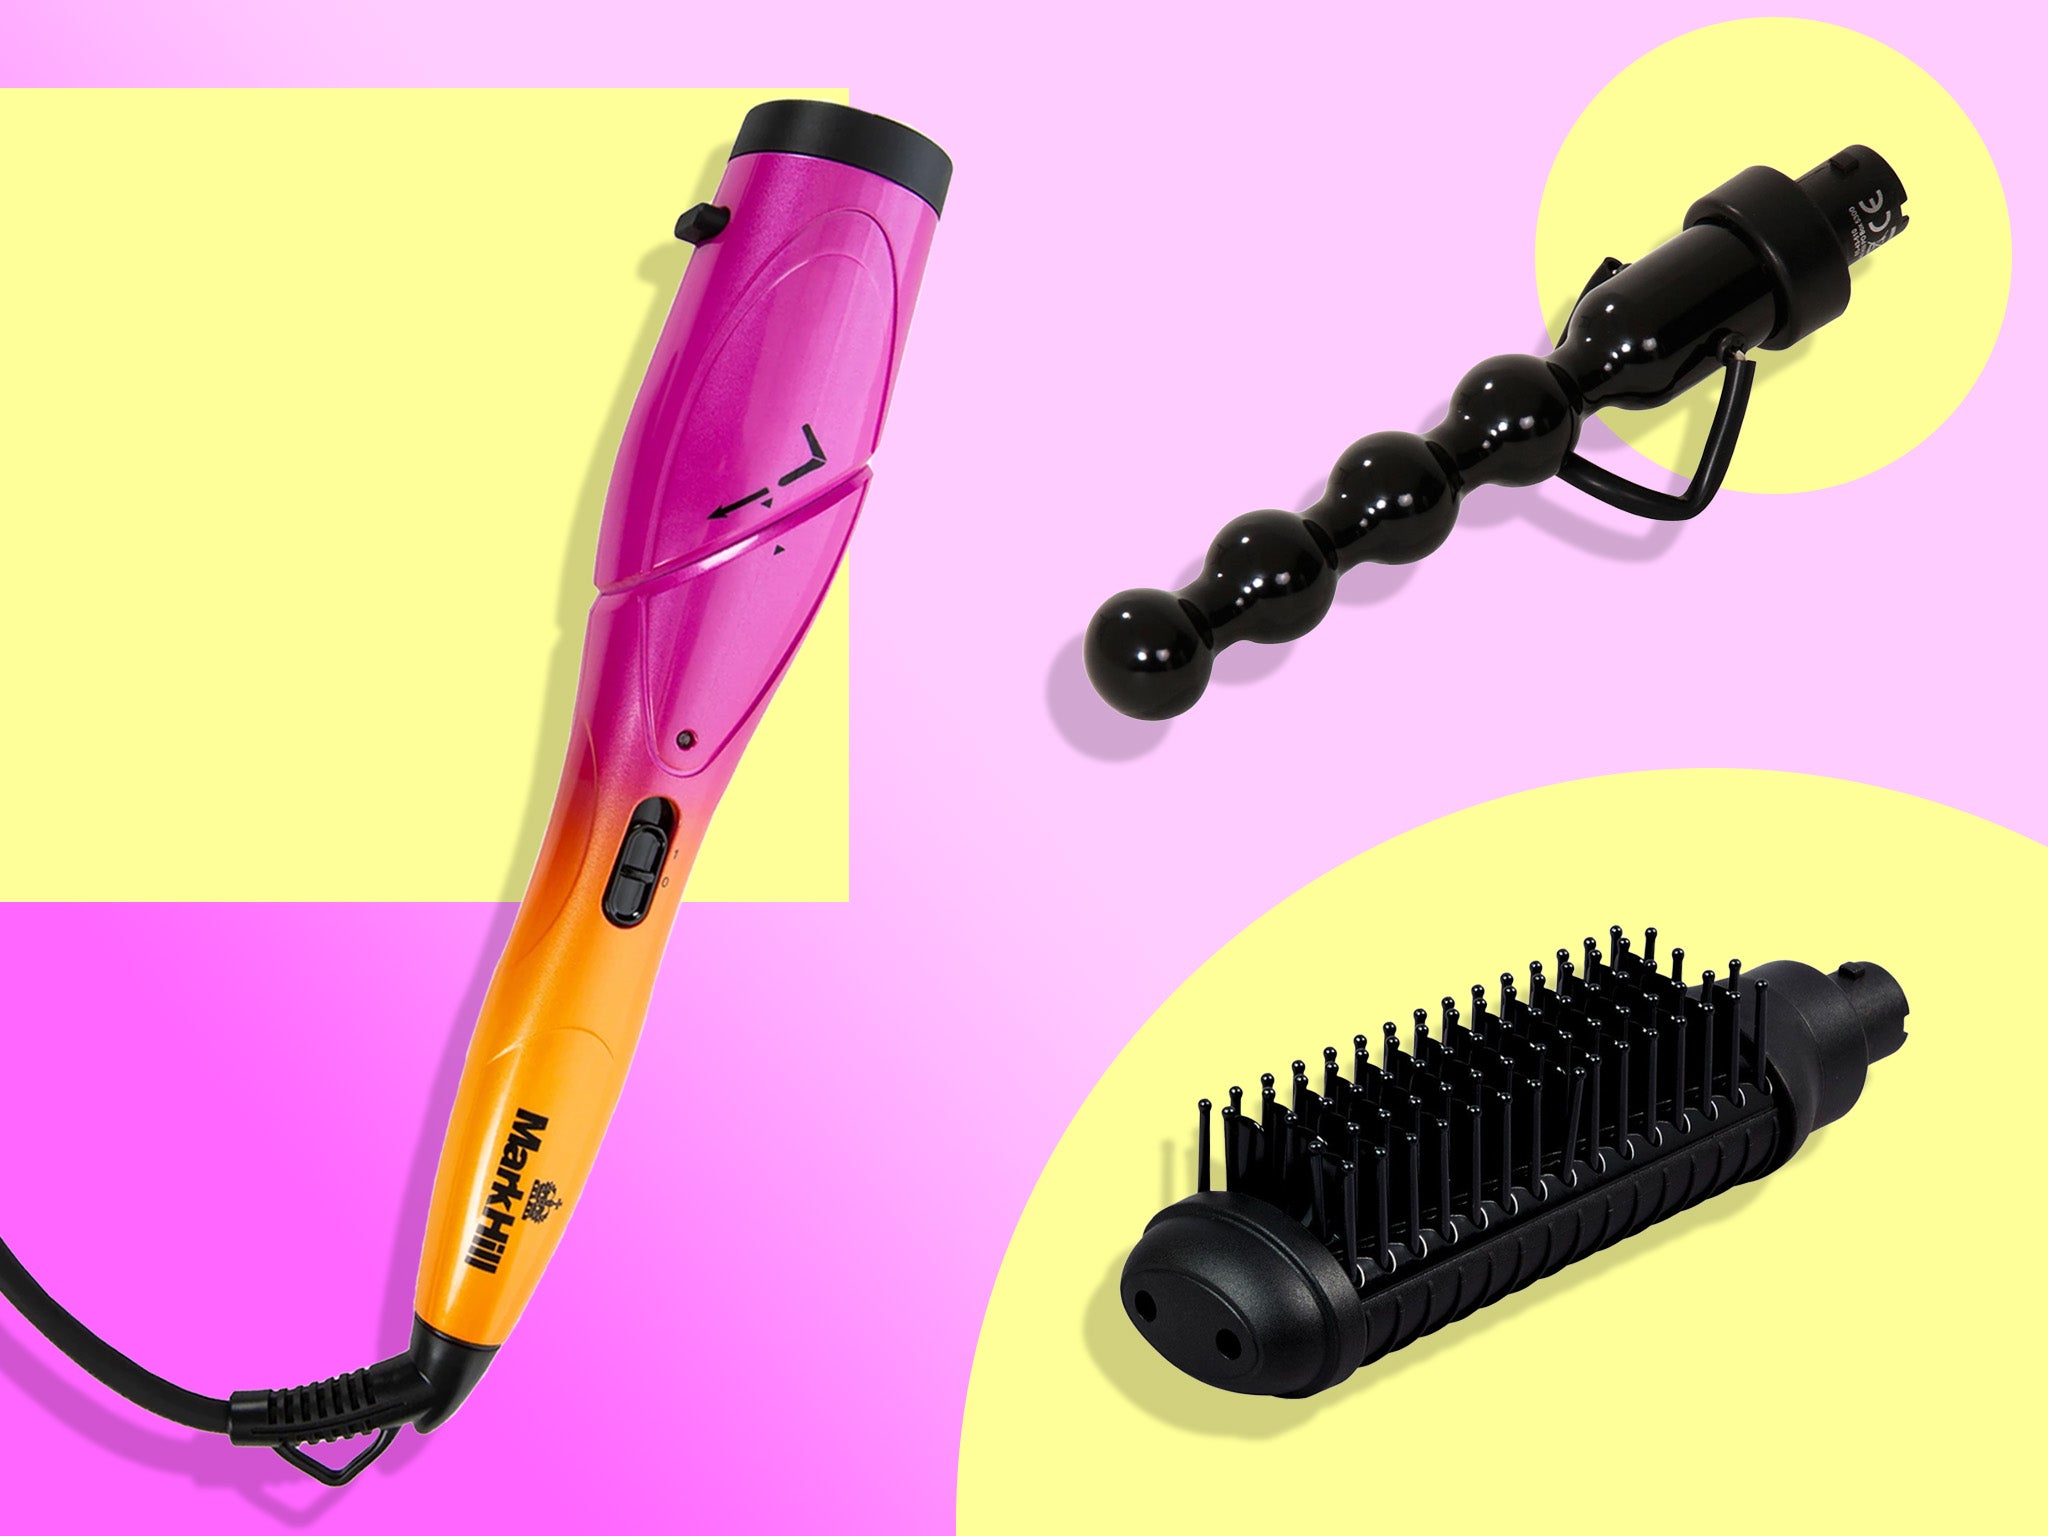 A tool that can style your hair for every occasion